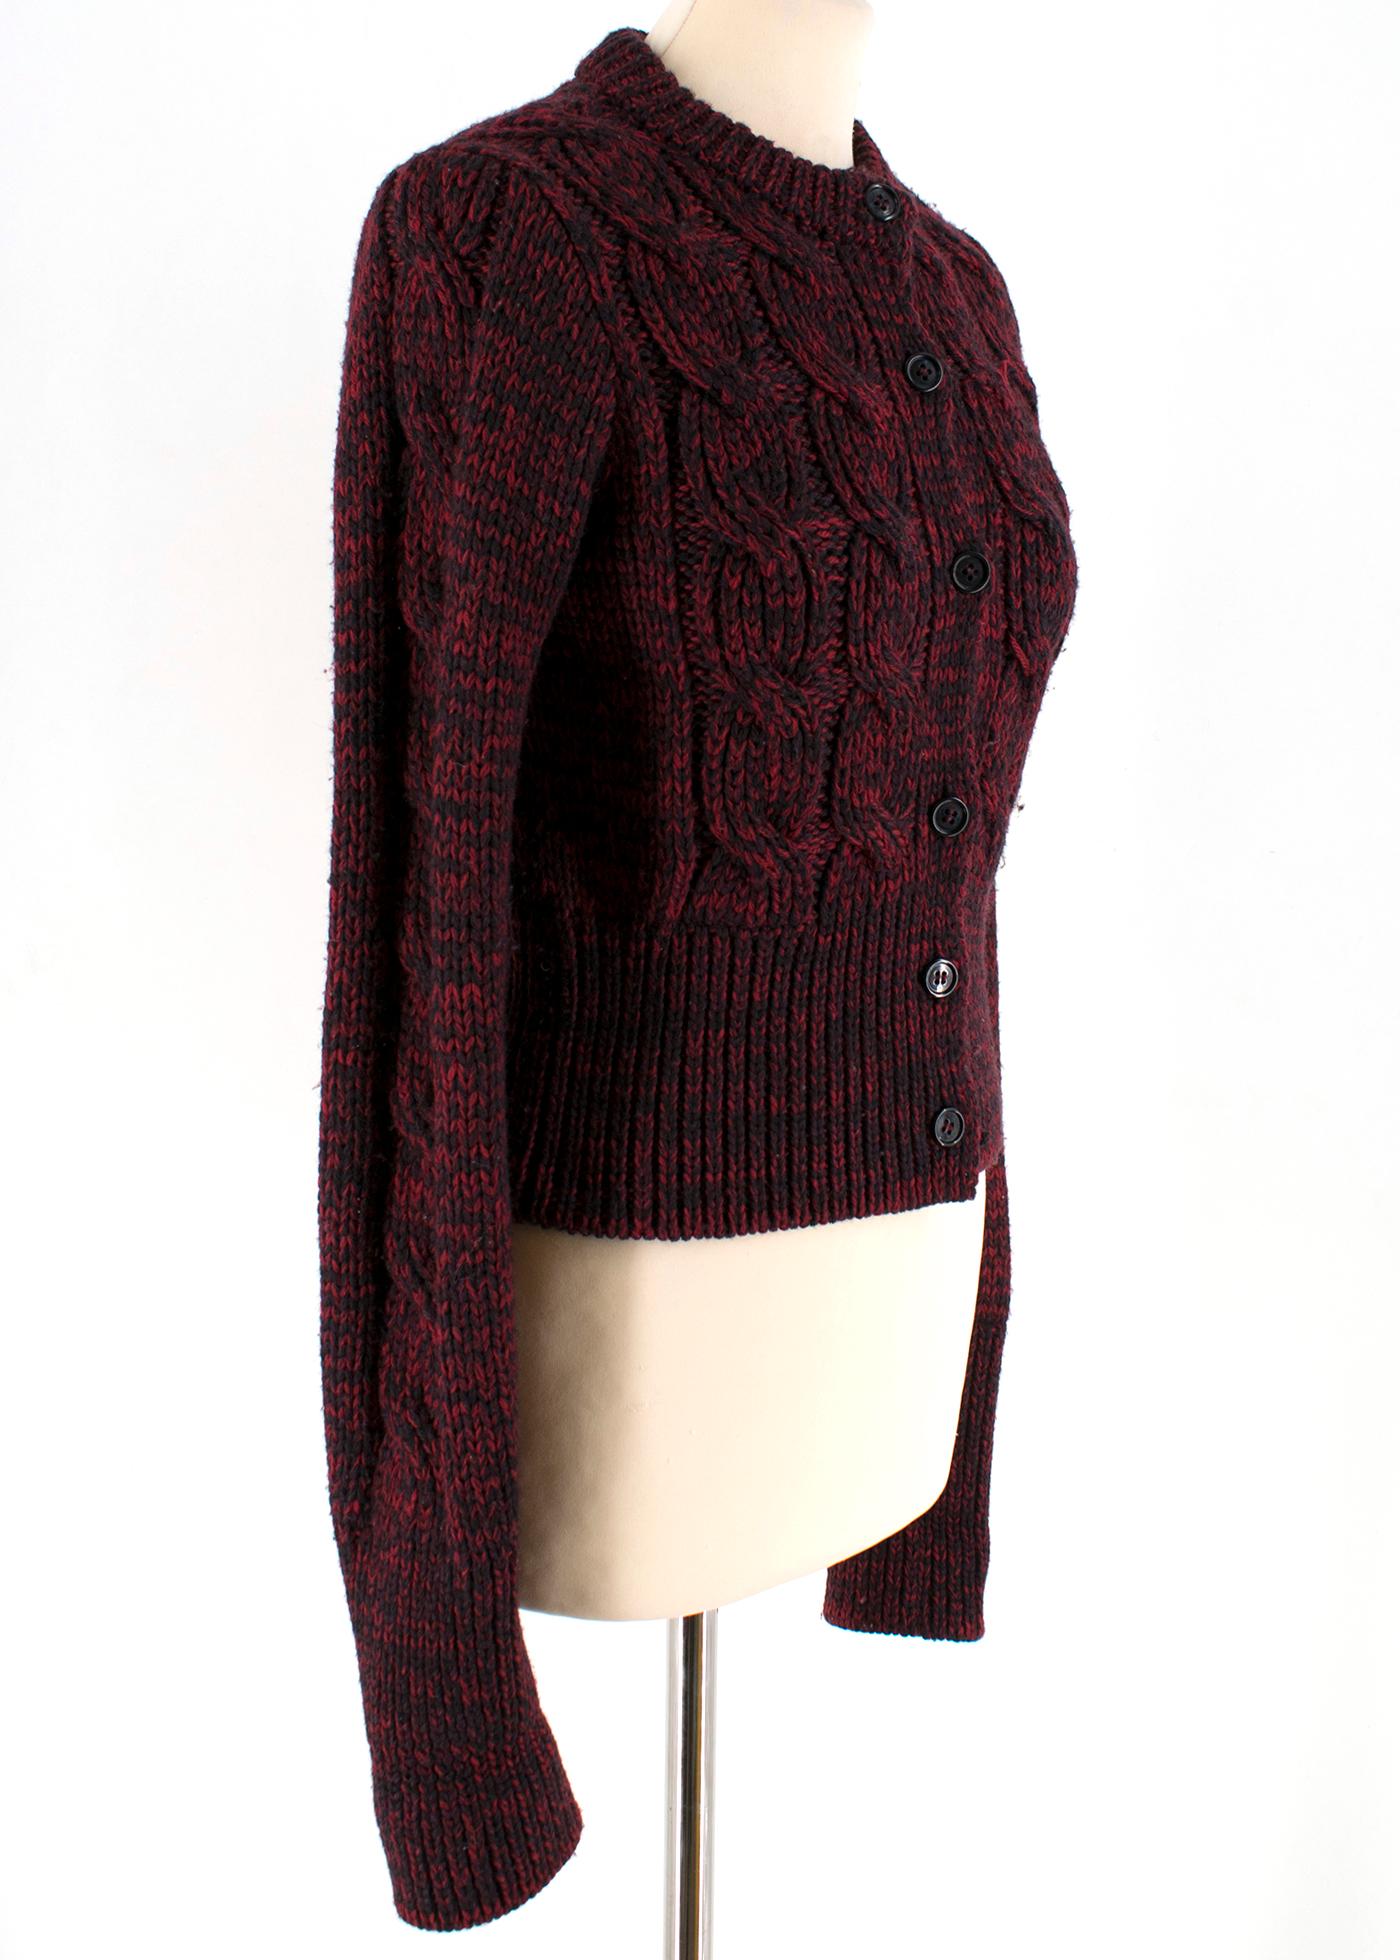  Prada Red & Black Wool Knit Crop Cardigan

- red and black wool knit cardigan 
- round neckline
- button fastening to the front
- crop length
- unlined

Please note, these items are pre-owned and may show some signs of storage, even when unworn and